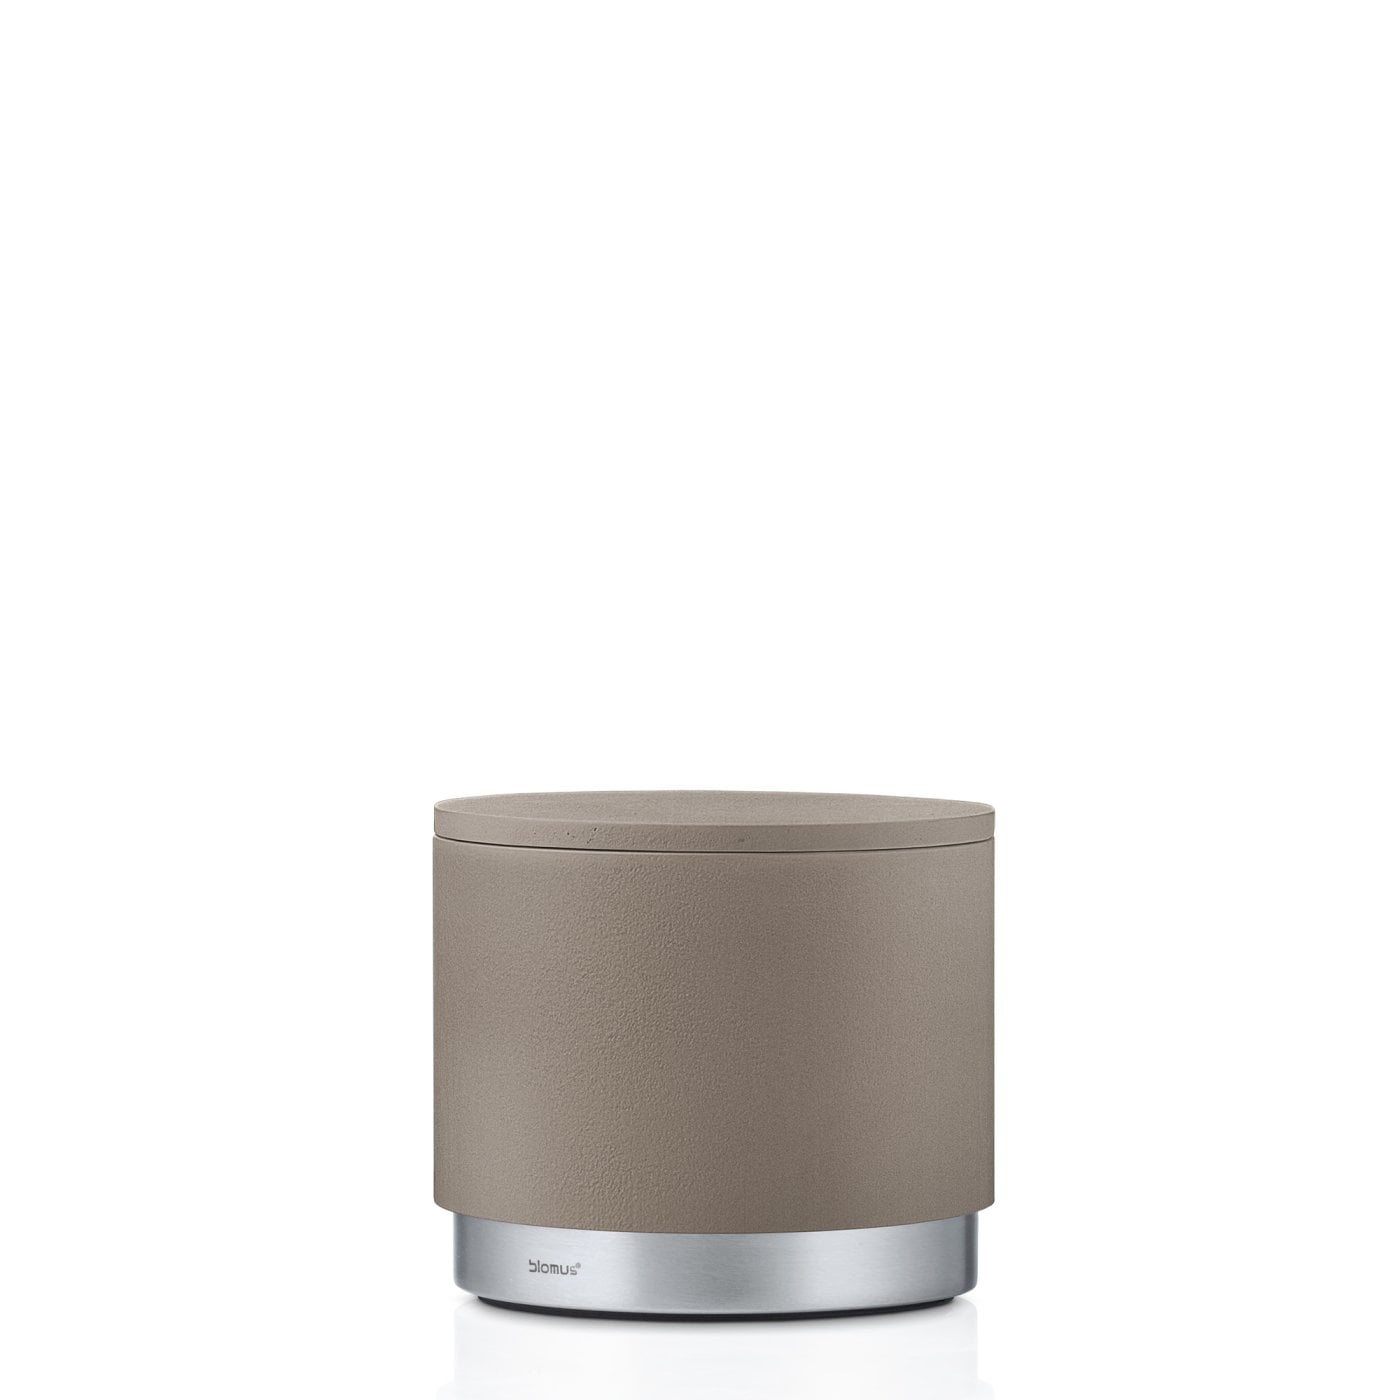 ARA SOAP STORAGE CANISTER BOX - Taupe